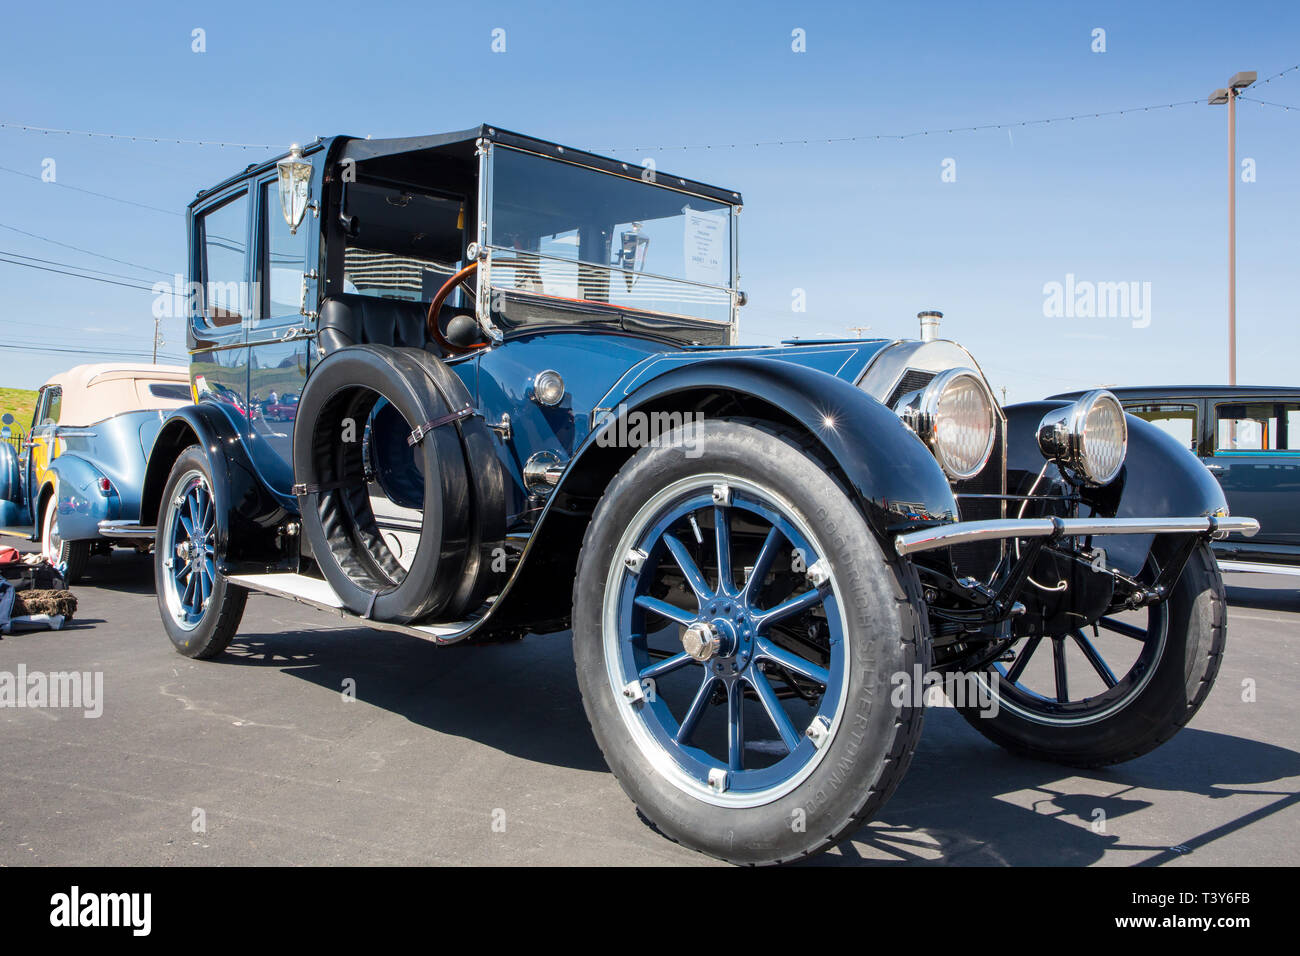 CONCORD, NC (USA) - April 6, 2019:  A 1915 Pierce-Arrow automobile on display at the Pennzoil AutoFair Classic Car Show at Charlotte Motor Speedway. Stock Photo